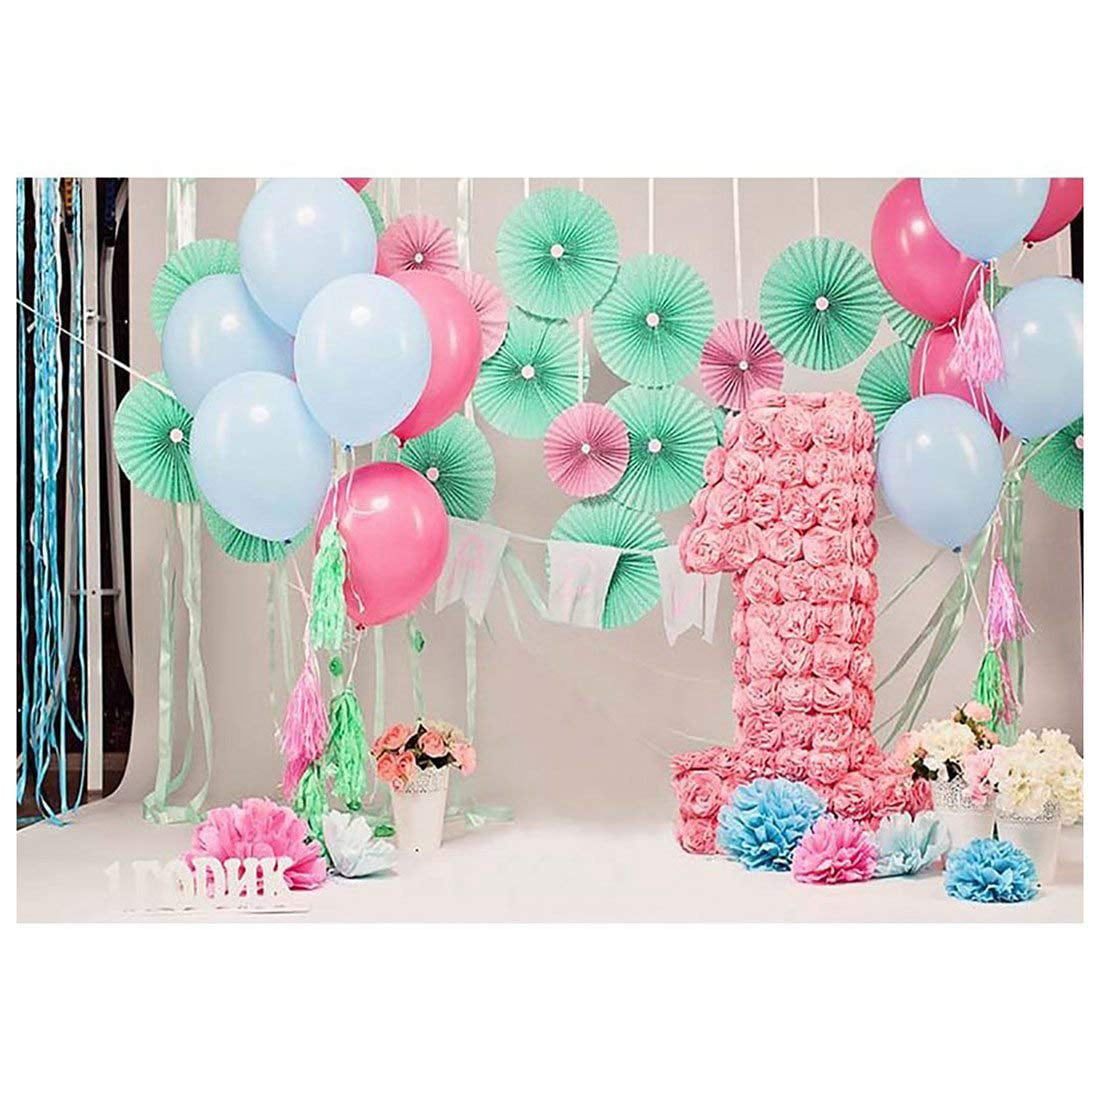 ABPHOTO Polyester 7x5ft Photography Backdrops Party Pink Balloons ...